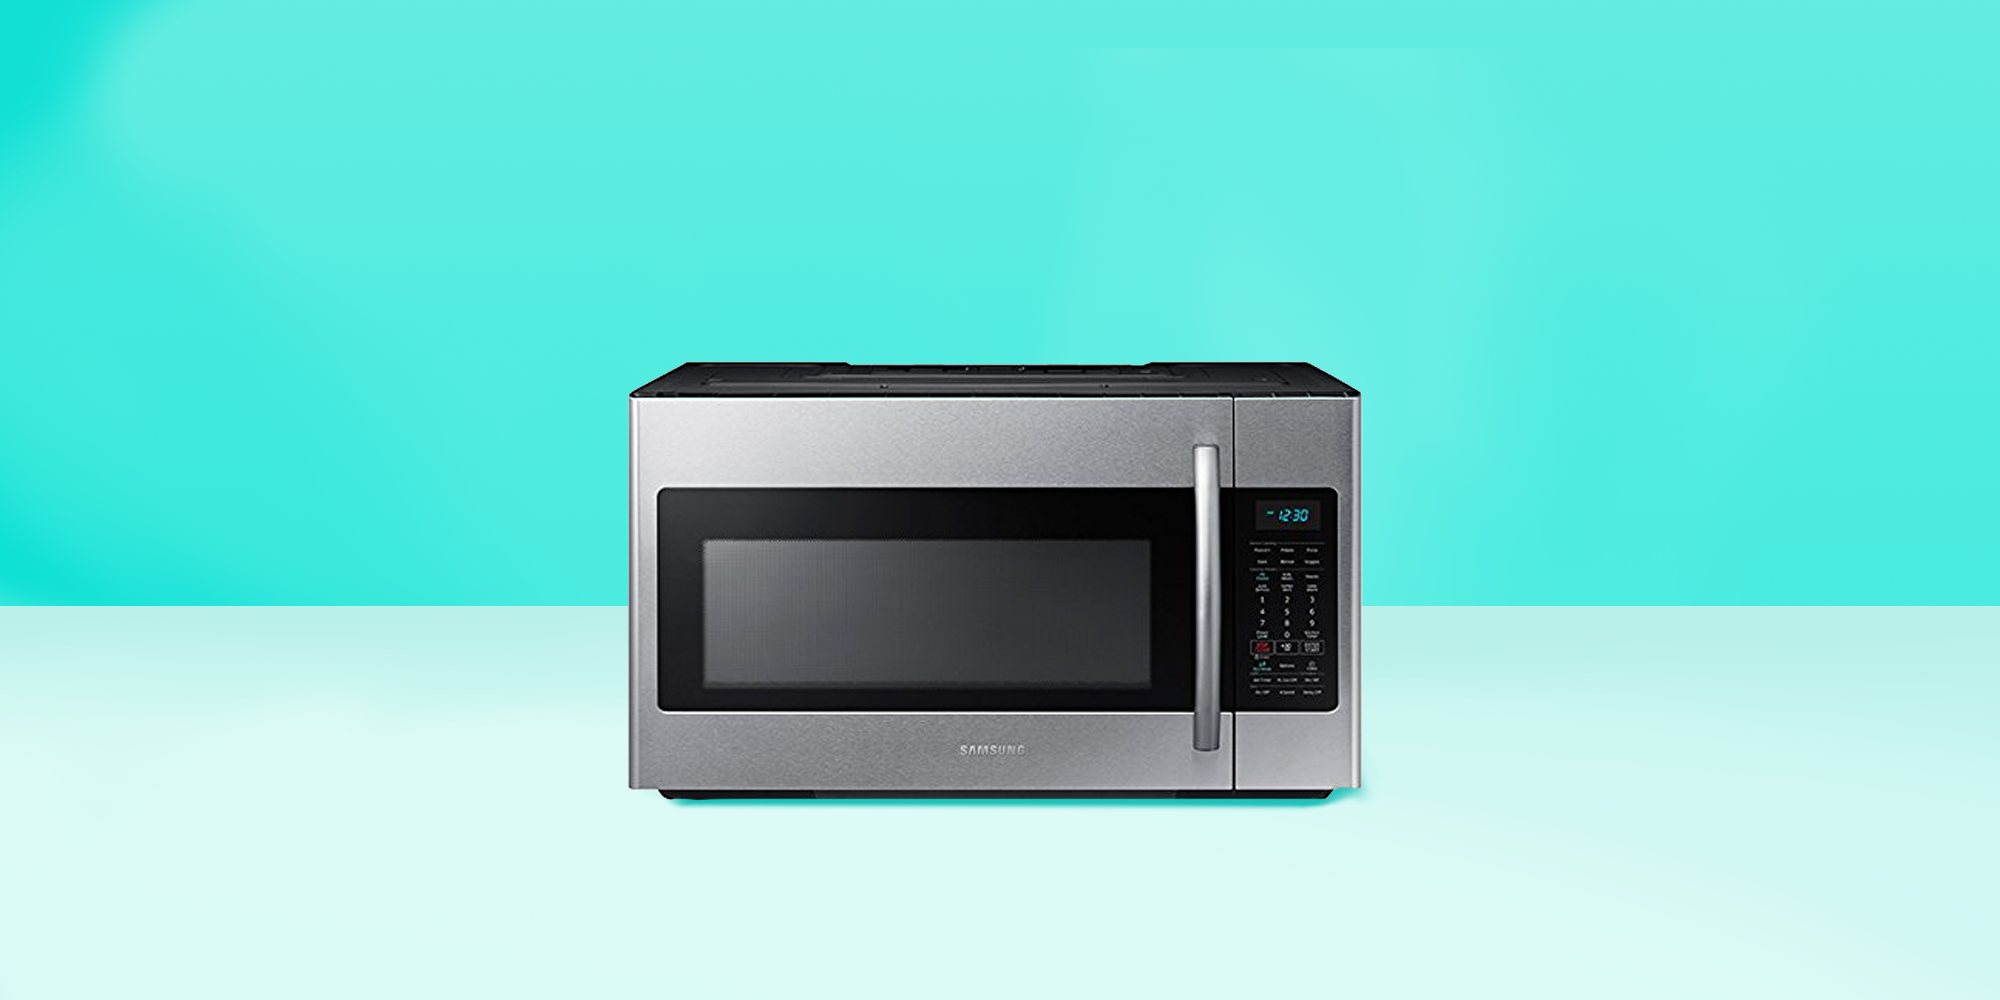 Cheap microwave: what you should keep in mind - Coolblue